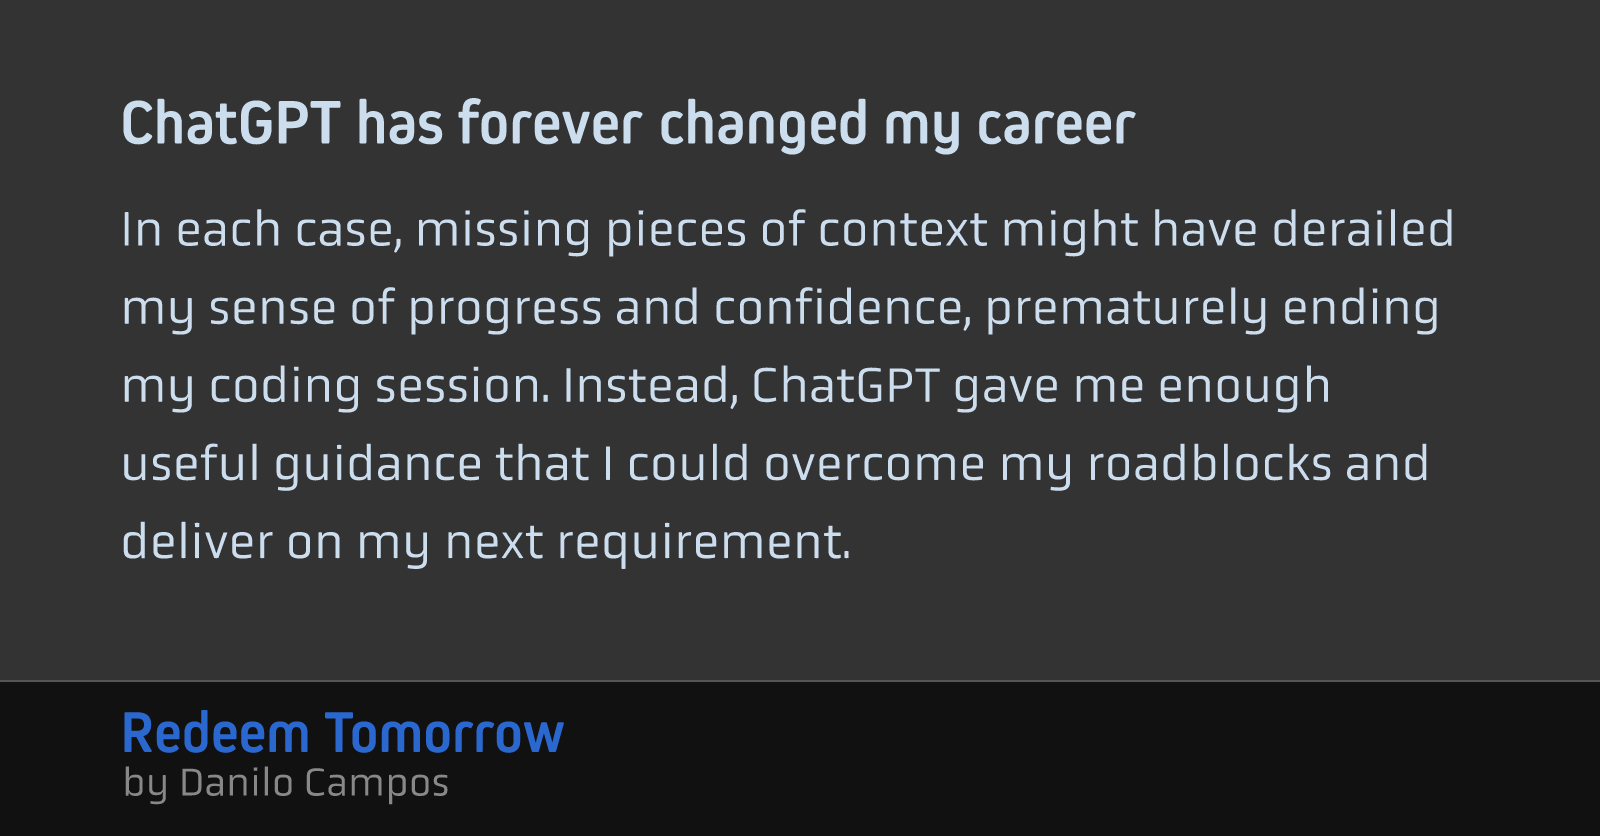 ChatGPT has forever changed my career